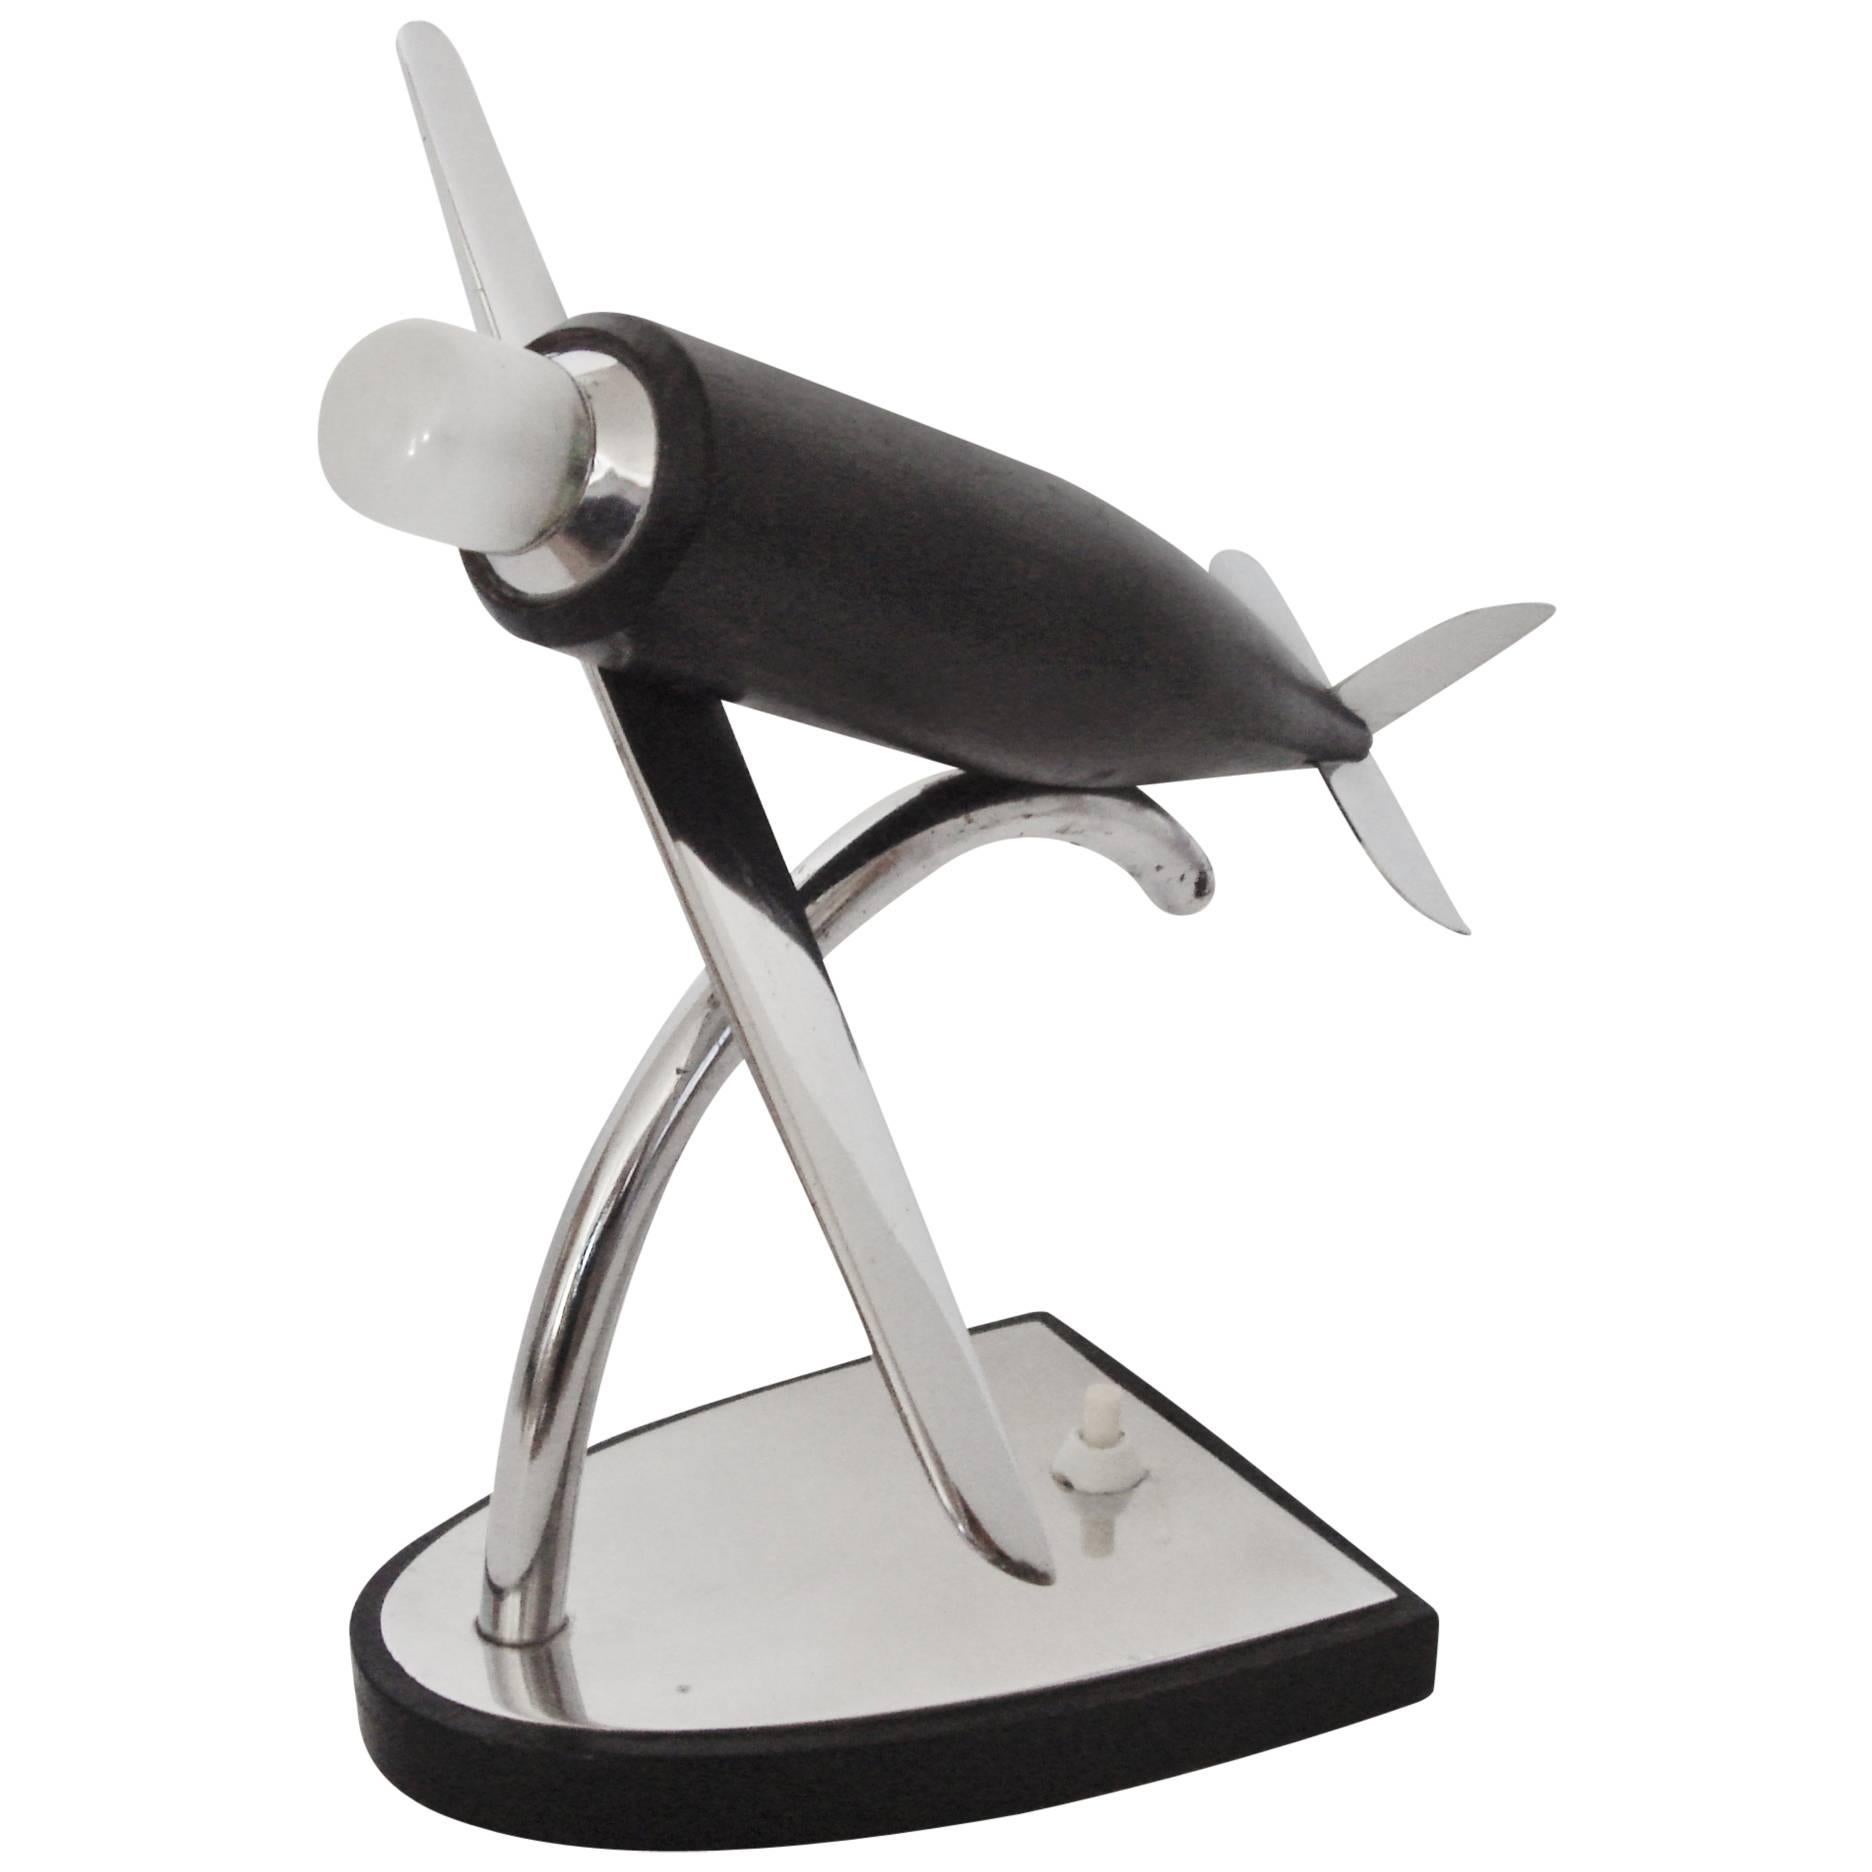 German Art Deco Chrome, Ebonized Wood and Bakelite Stylized Airplane Accent Lamp For Sale